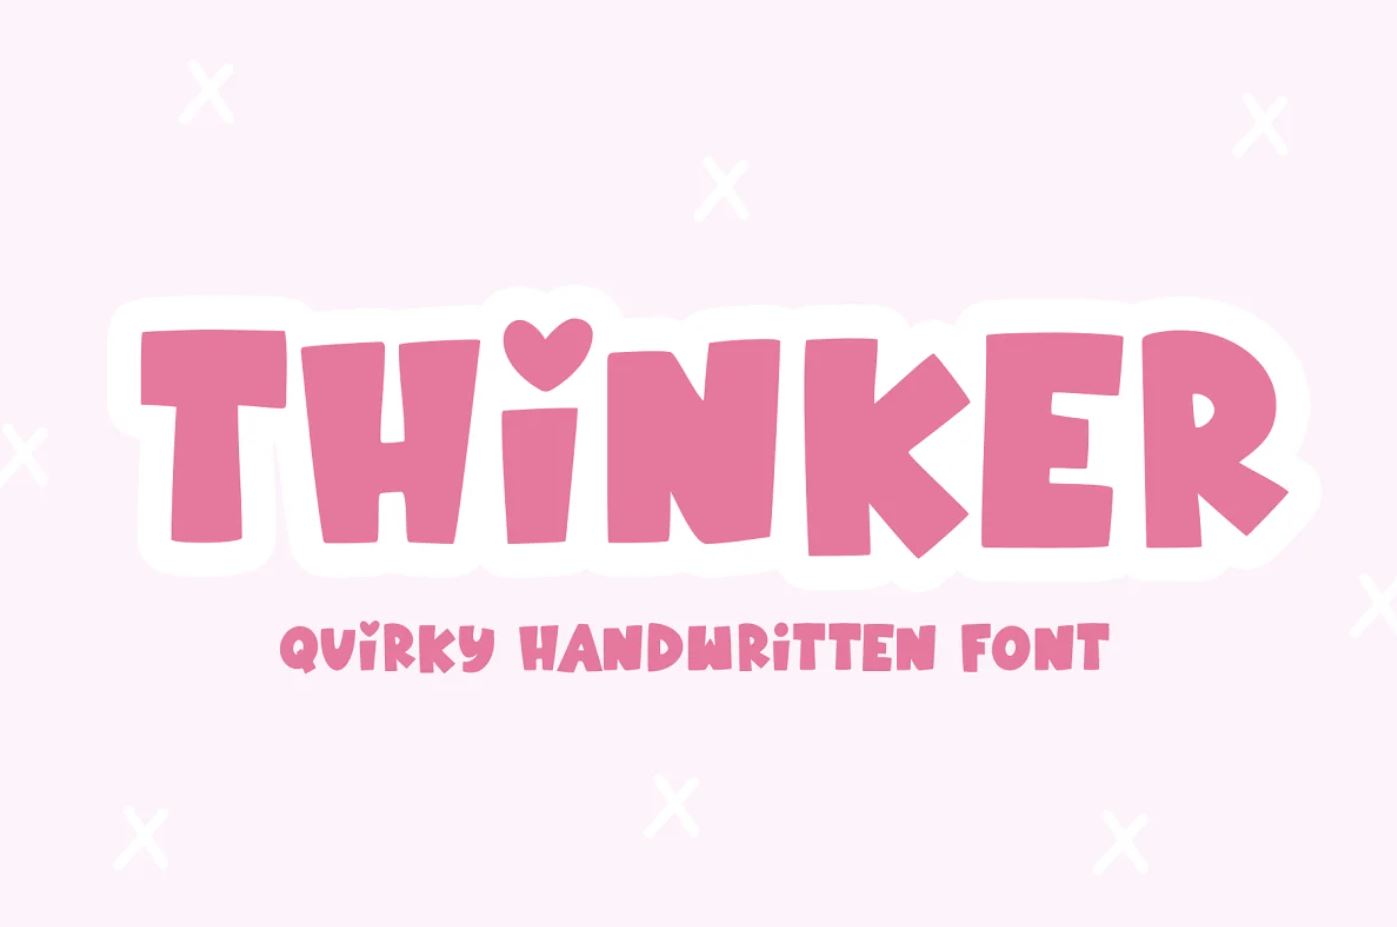 Quirky handwritten display font for kids related projects